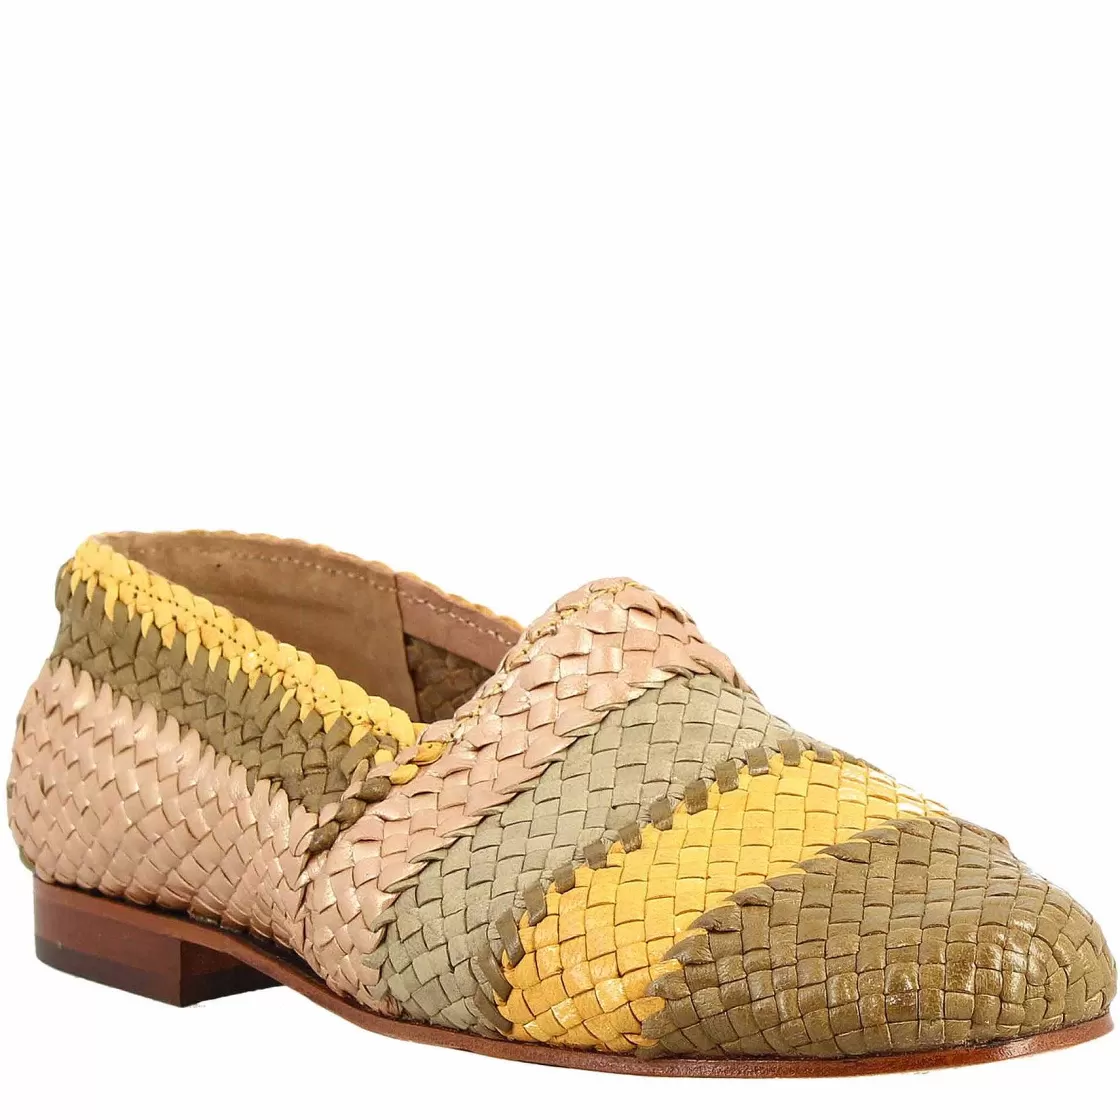 Leonardo Handmade Women'S Moccasins In Green, Yellow And Beige Woven Leather Store